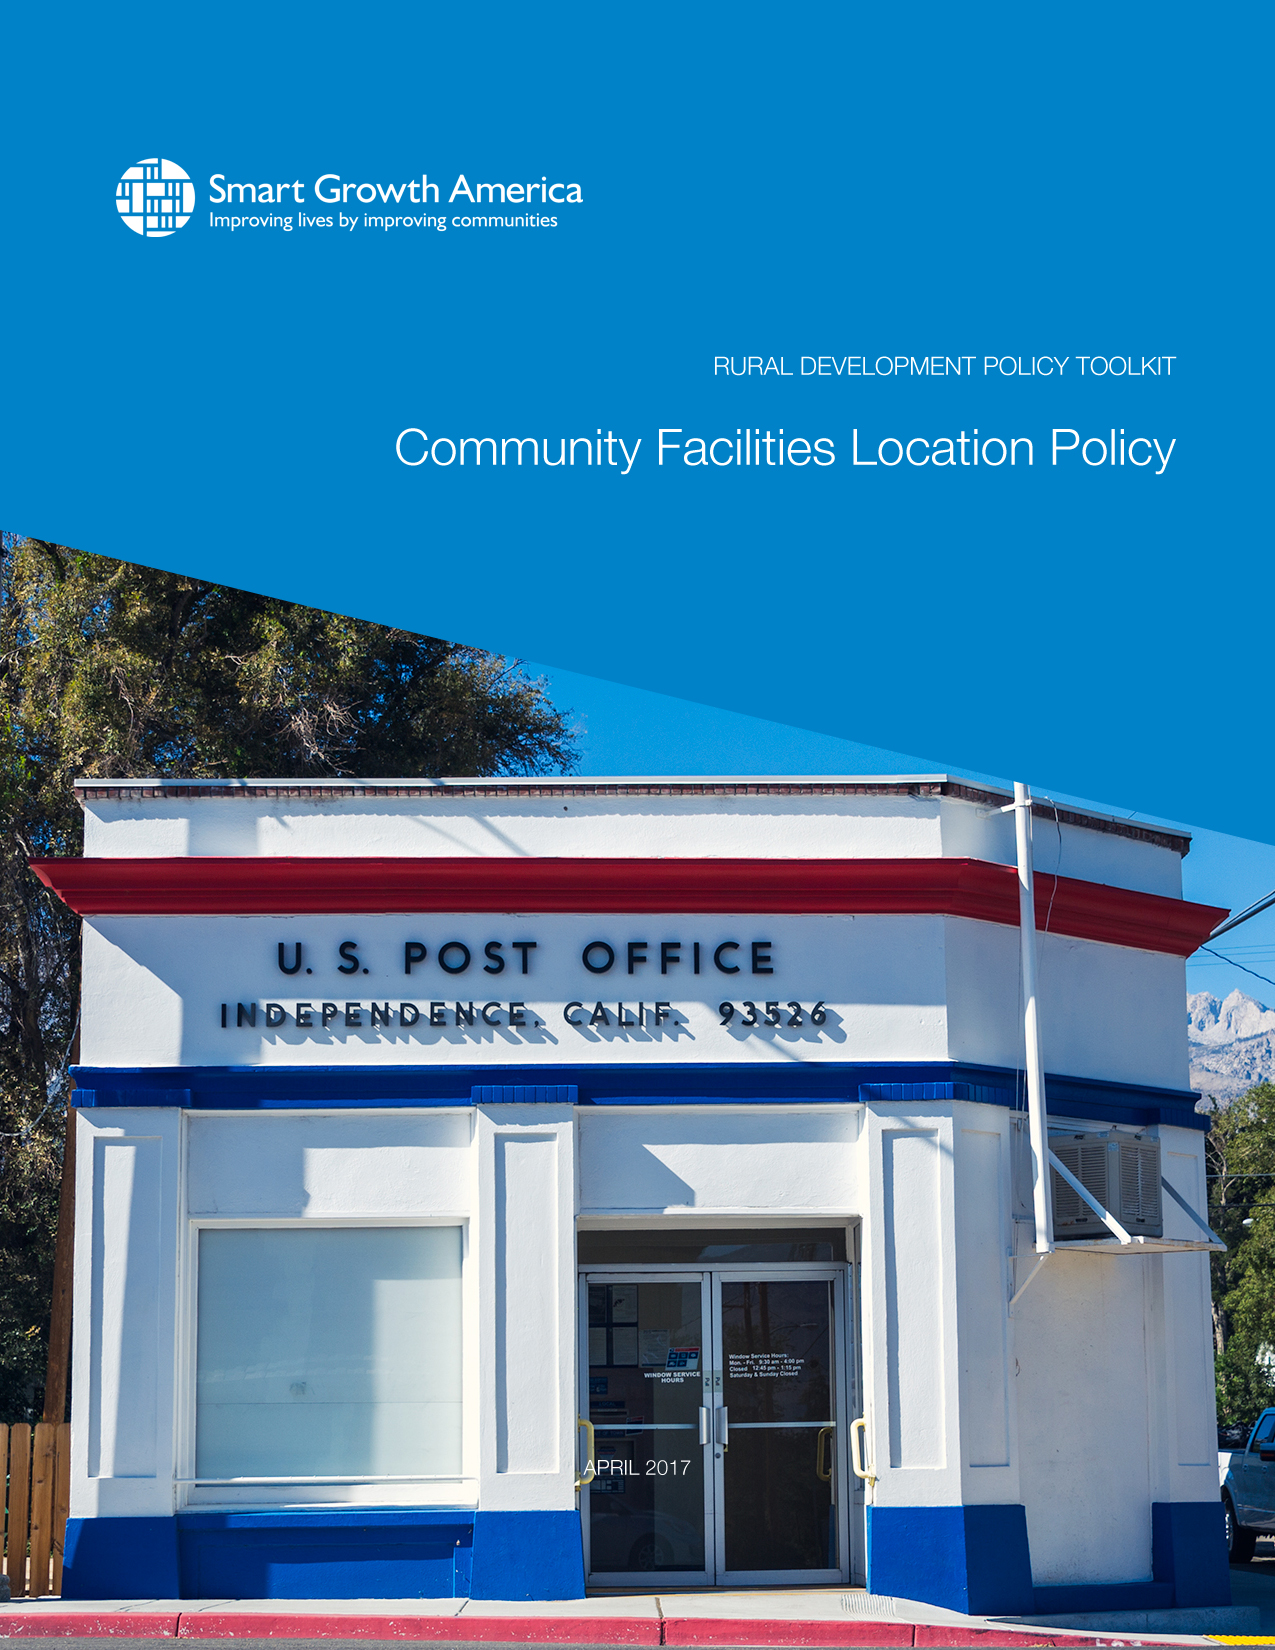 Community Facilities Location Policy Toolkit